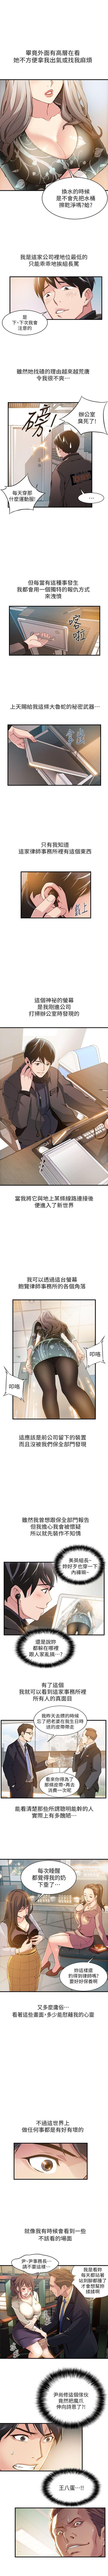 Wanking 弱點 1-101 官方中文（連載中） Chastity - Page 6